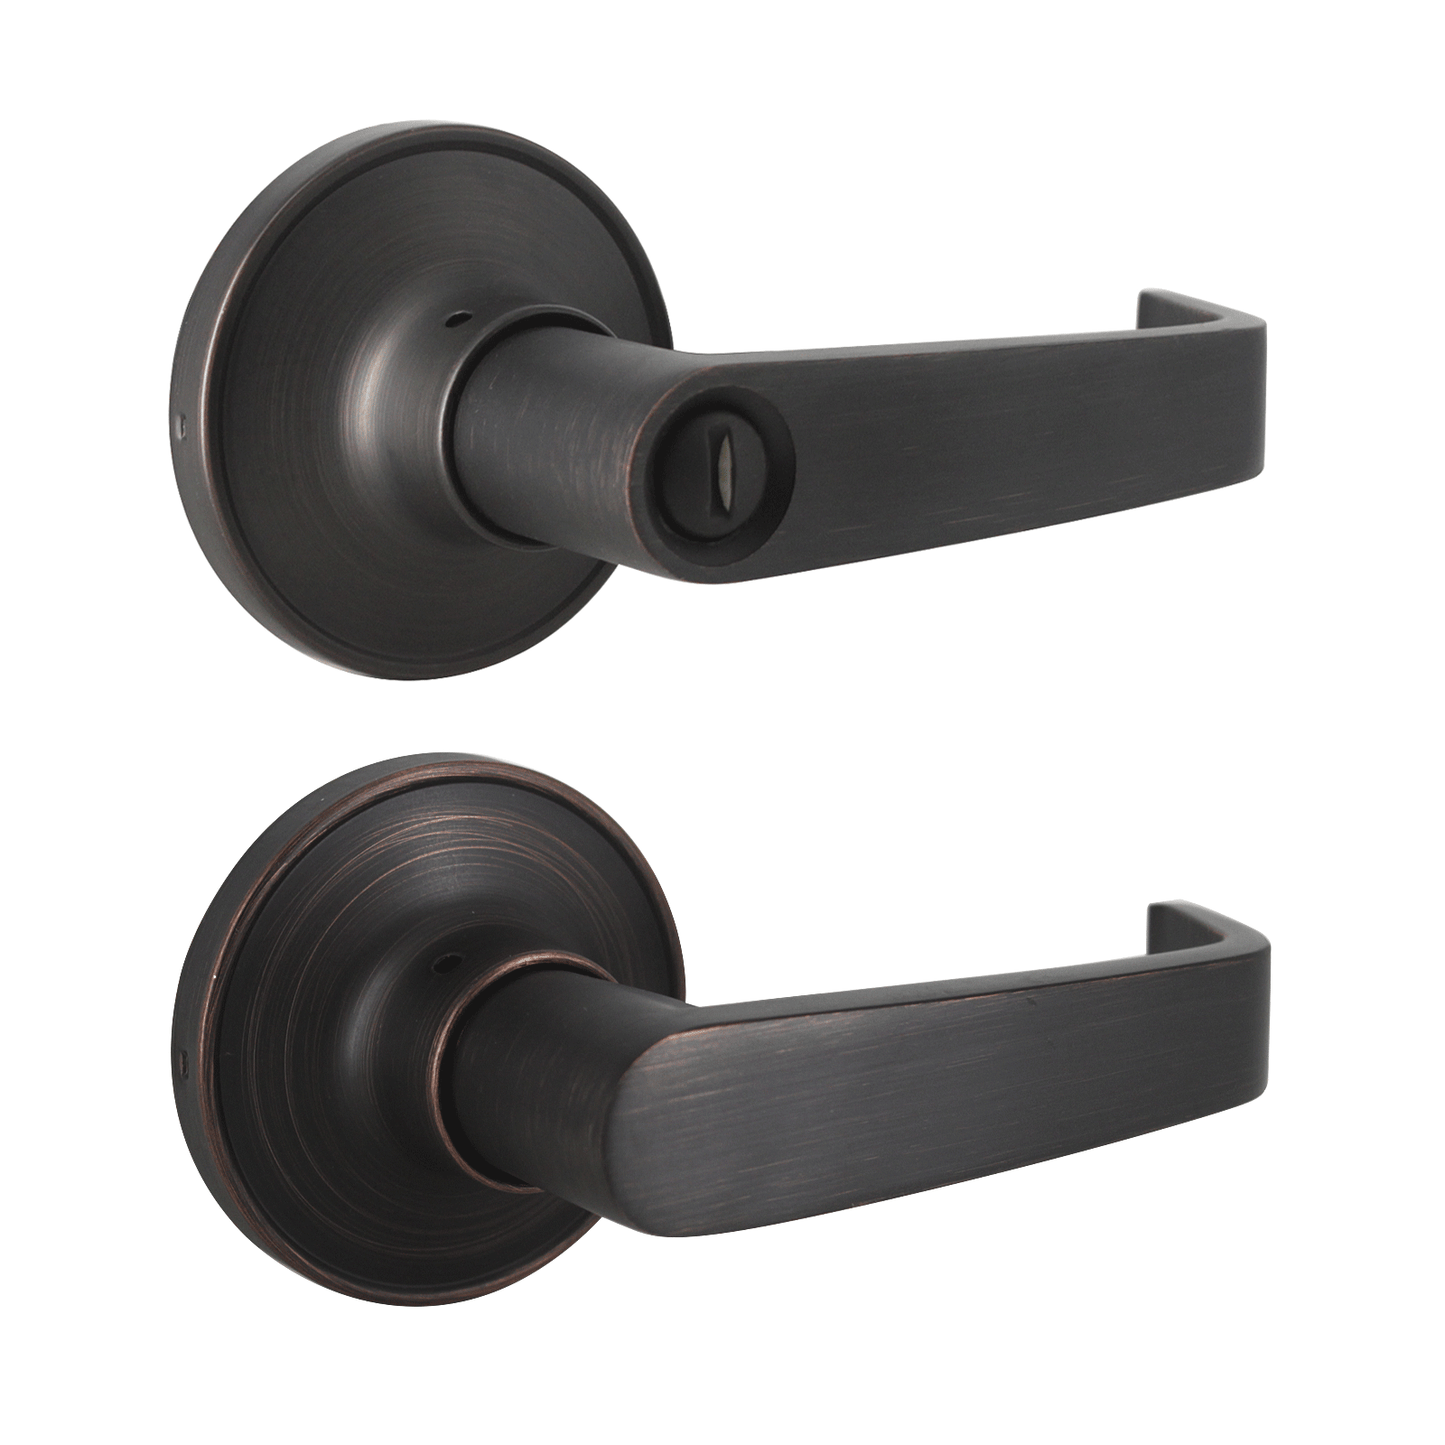 Scroll Wave Style Door Handles Oil Rubbed Bronze Finish Privacy/Passage Function Door Lever Lock - DL850AORB - Probrico